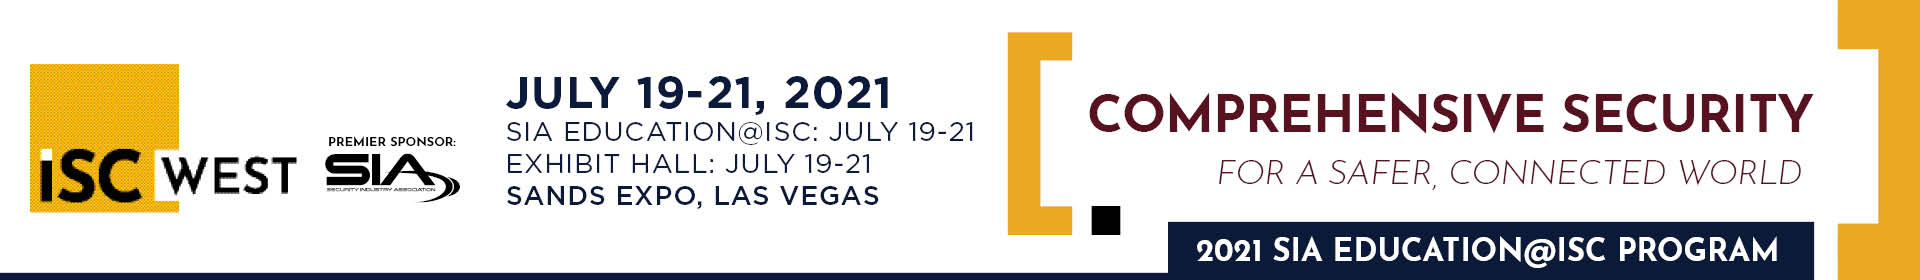 ISC West 2021 Event Banner